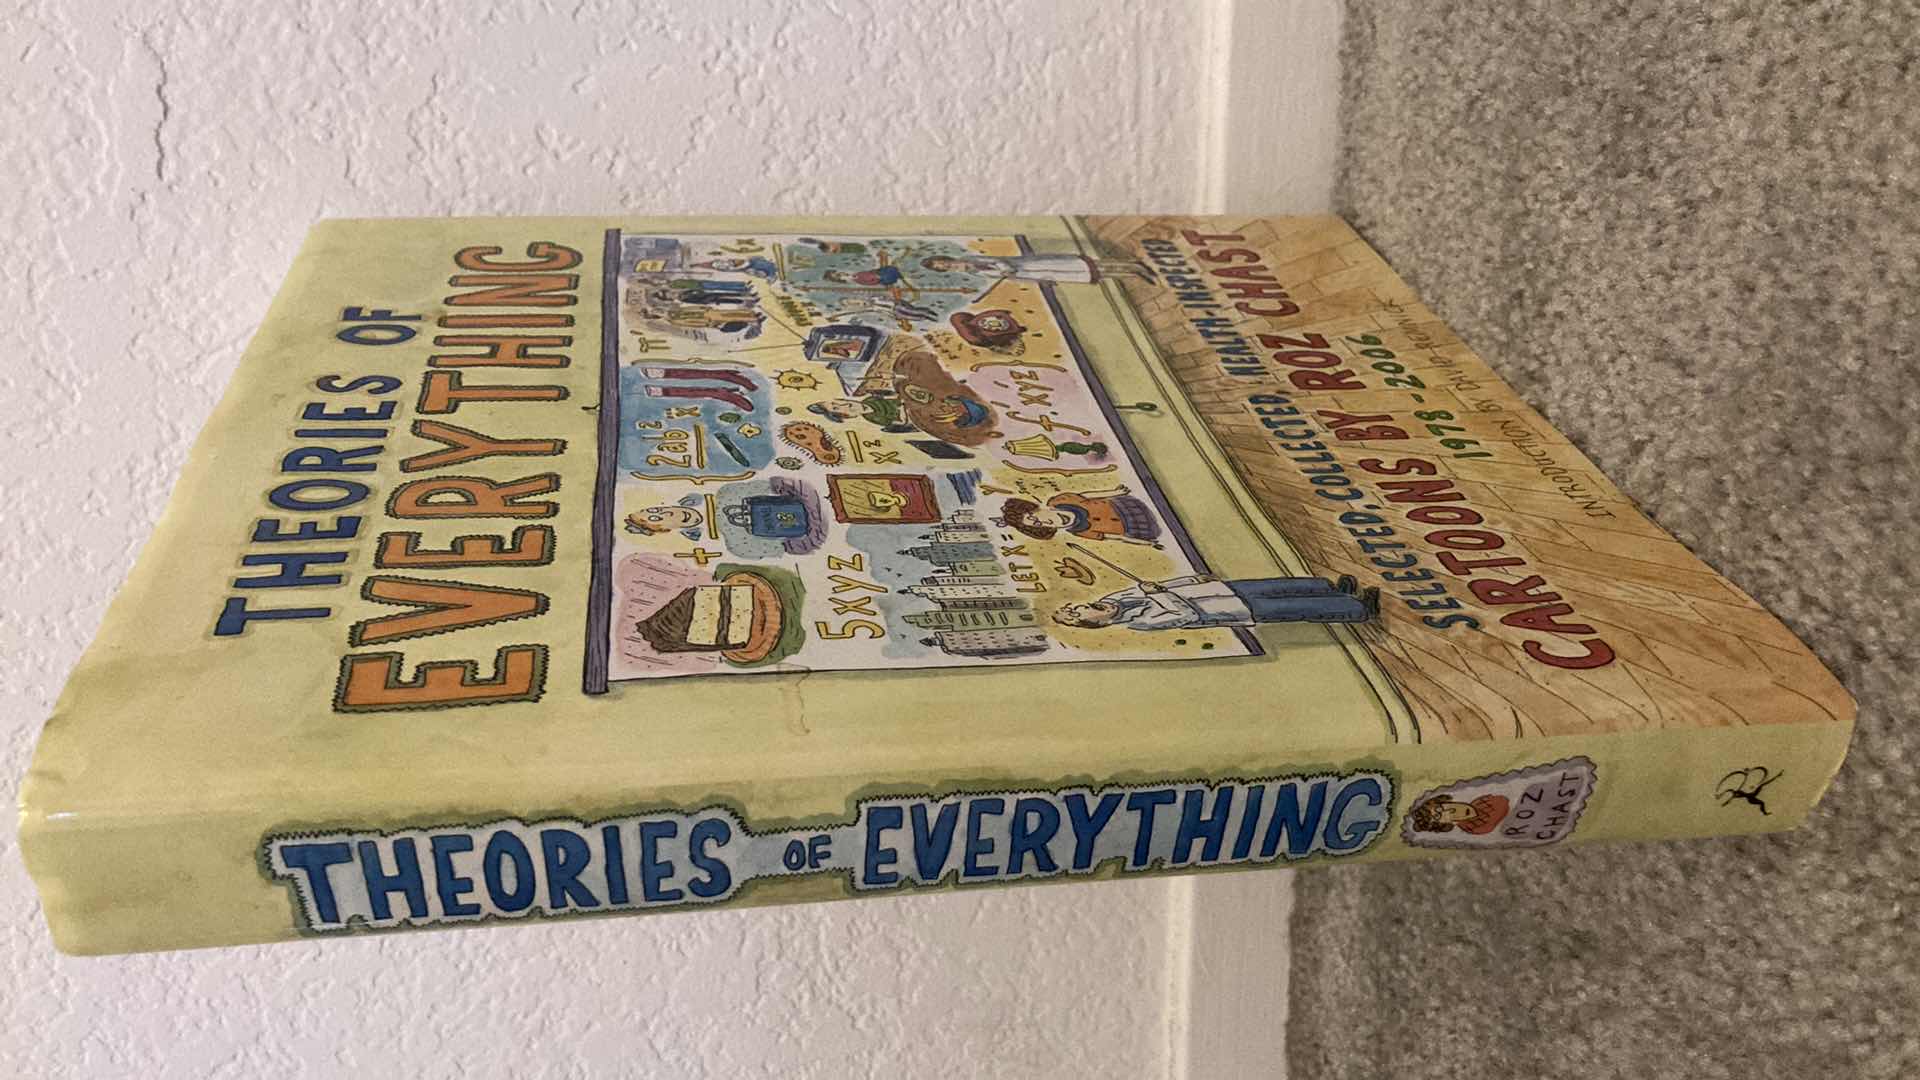 Photo 2 of THEORIES OF EVERYTHING SELECTED COLLECTED HEALTH INSPECTED CARTOONS BOOK AUTOGRAPHED BY ARTIST ROZ CHAST